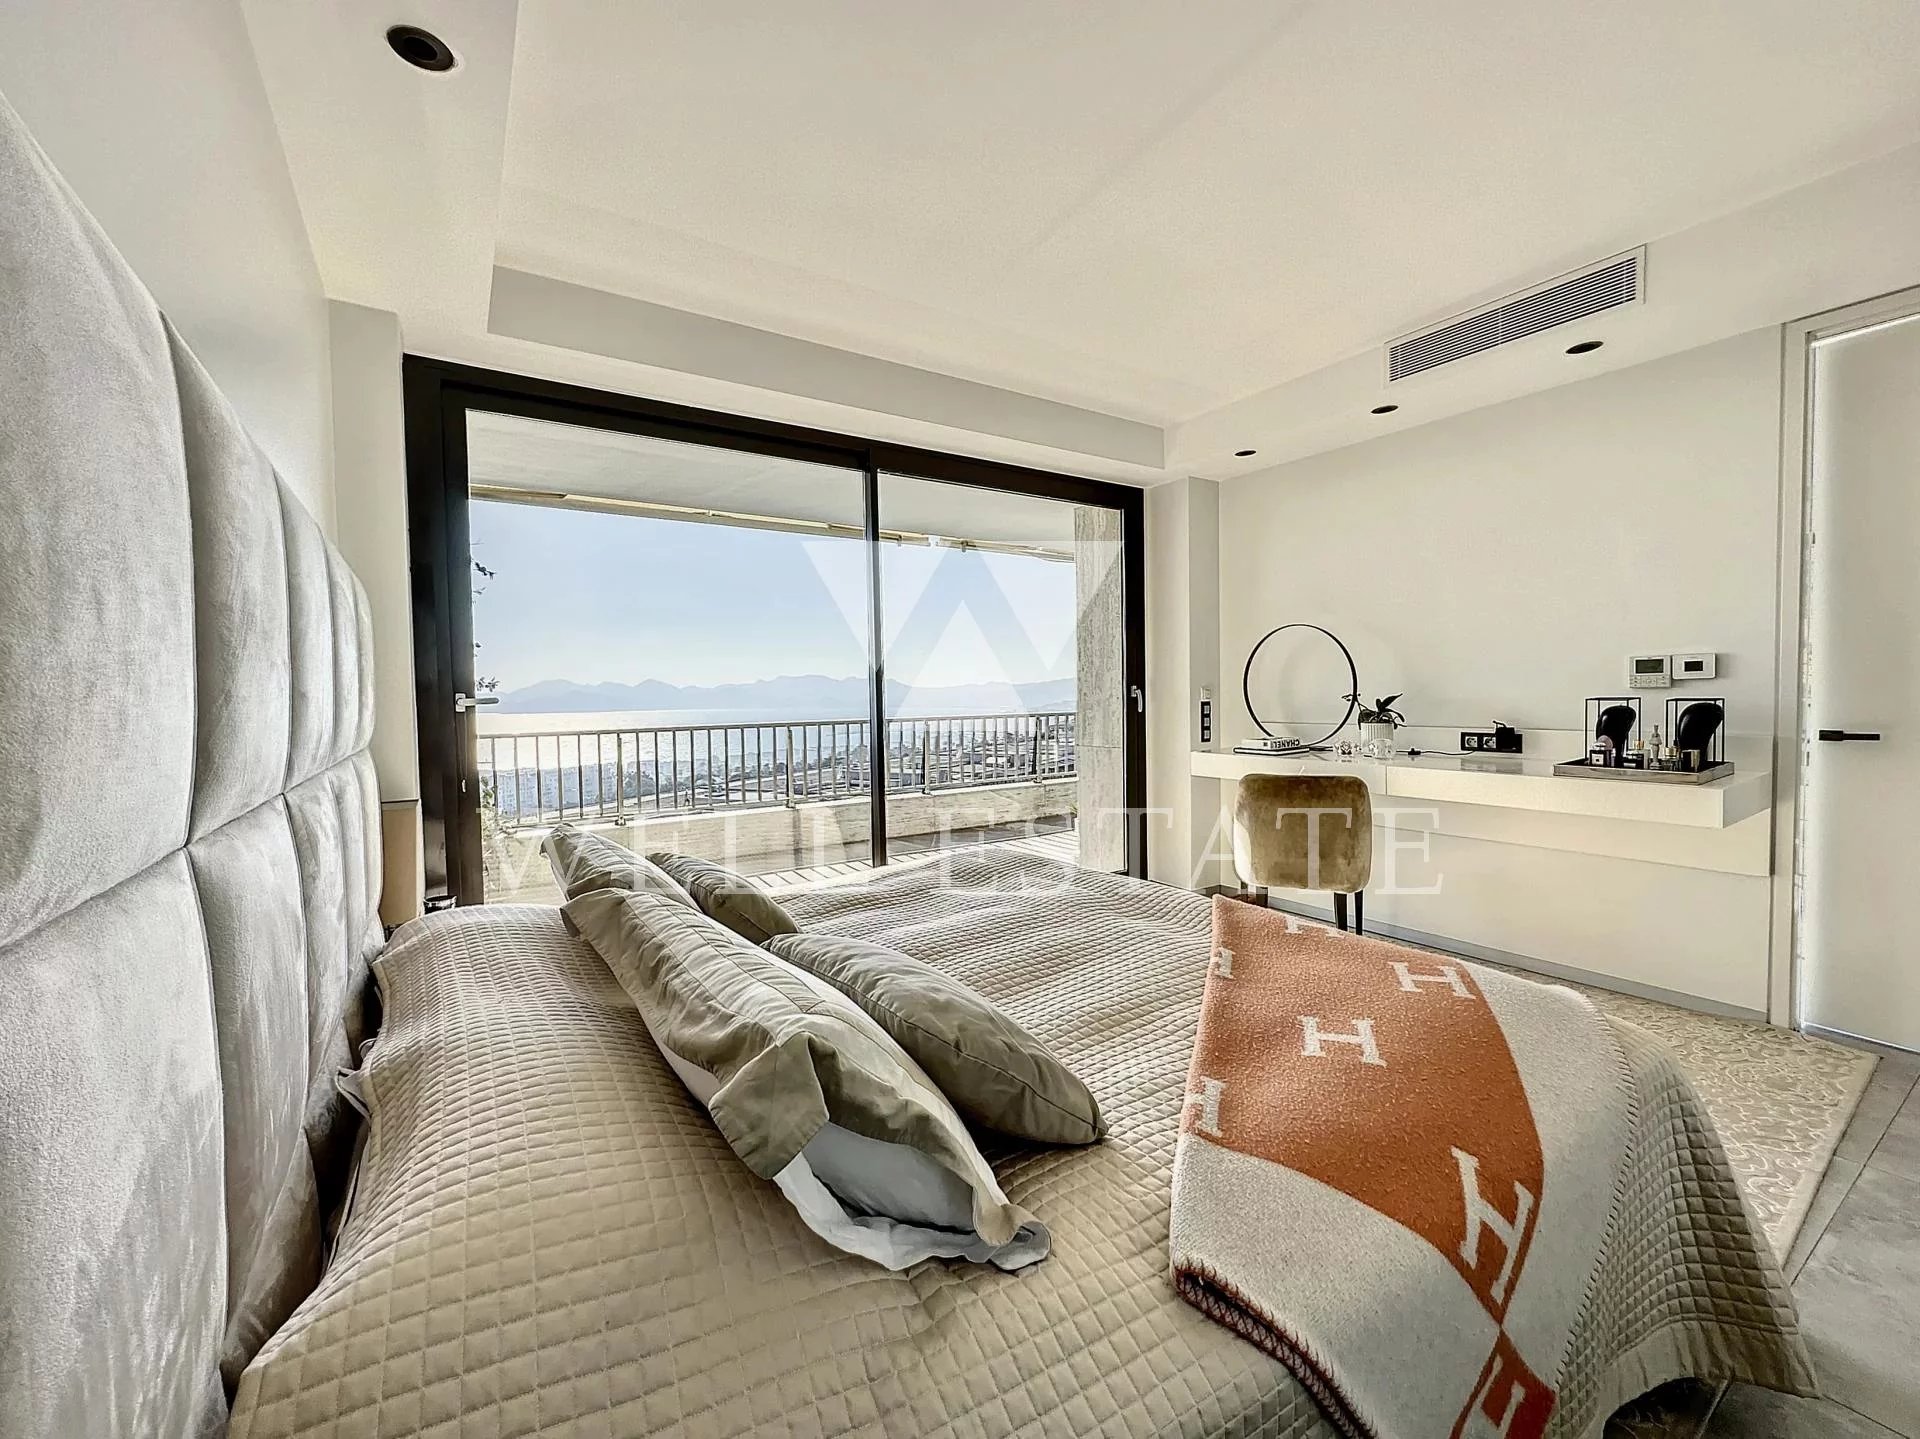 CANNES CALIFORNIE 3/4 BEDROOM RENOVATED APARTMENT 166M2 SEA VIEW .